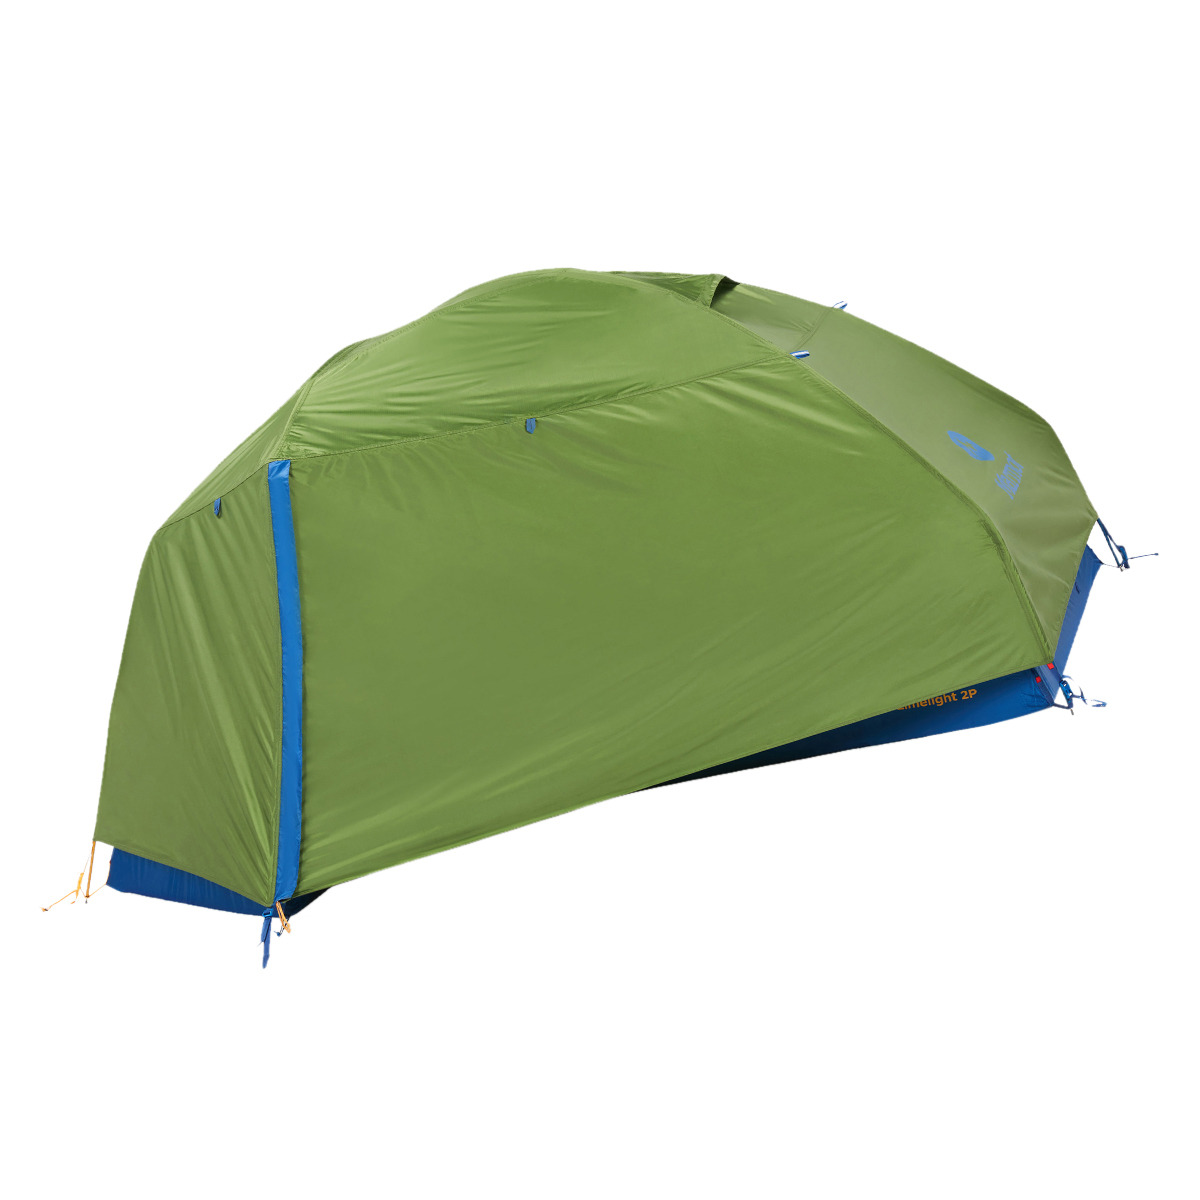 Limelight 2P - 2-Person Camping Tent